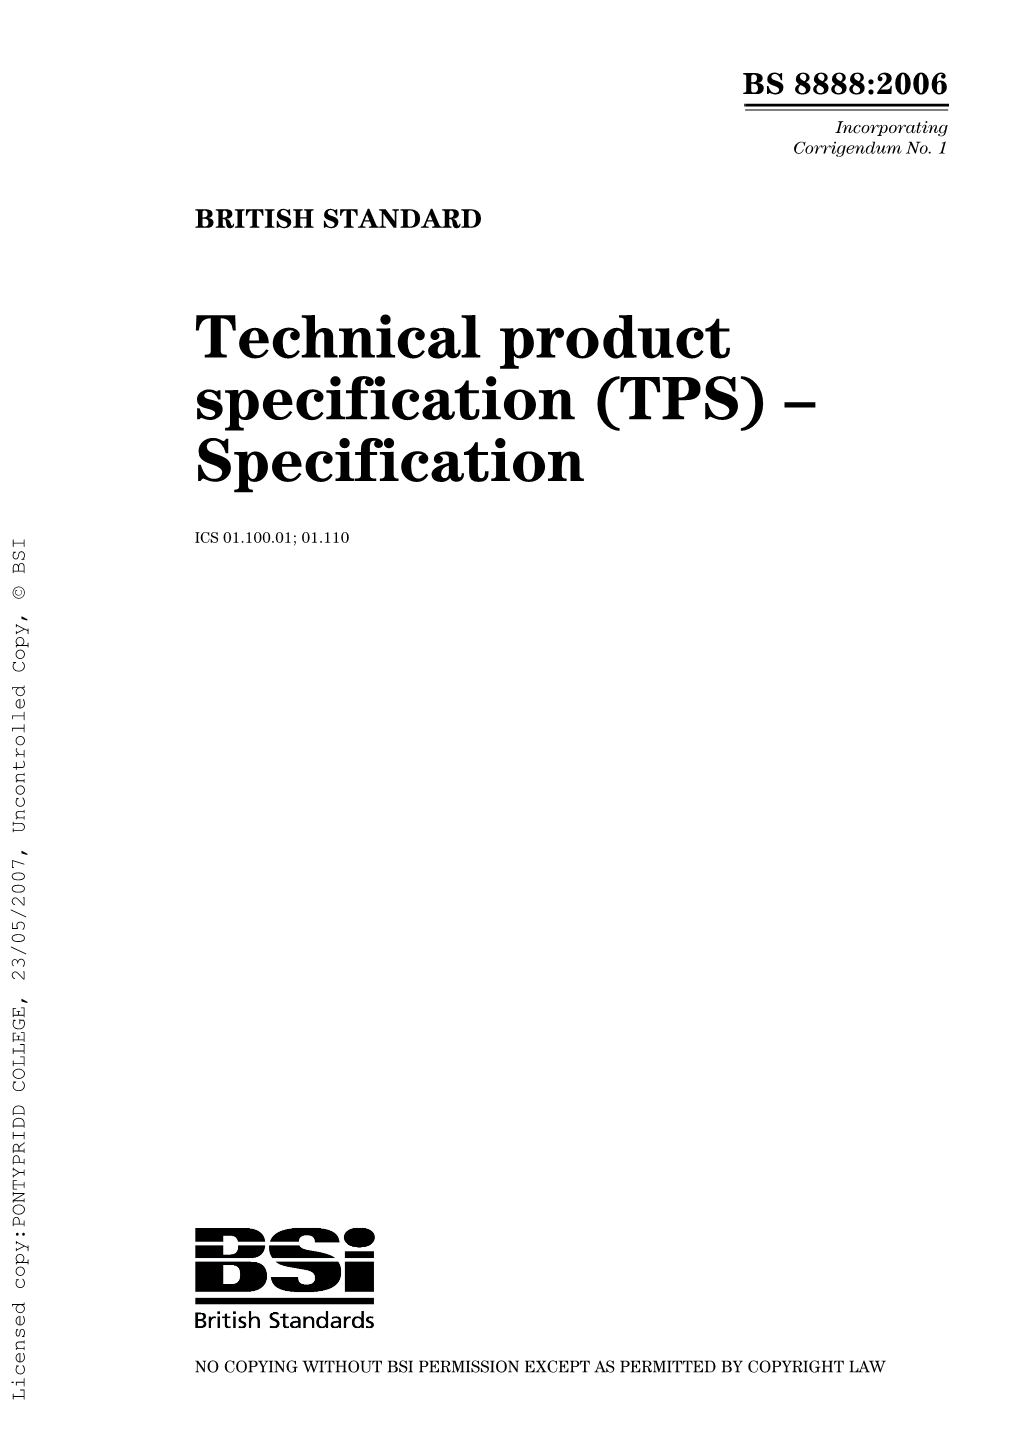 Technical Product Specification (TPS) – Specification